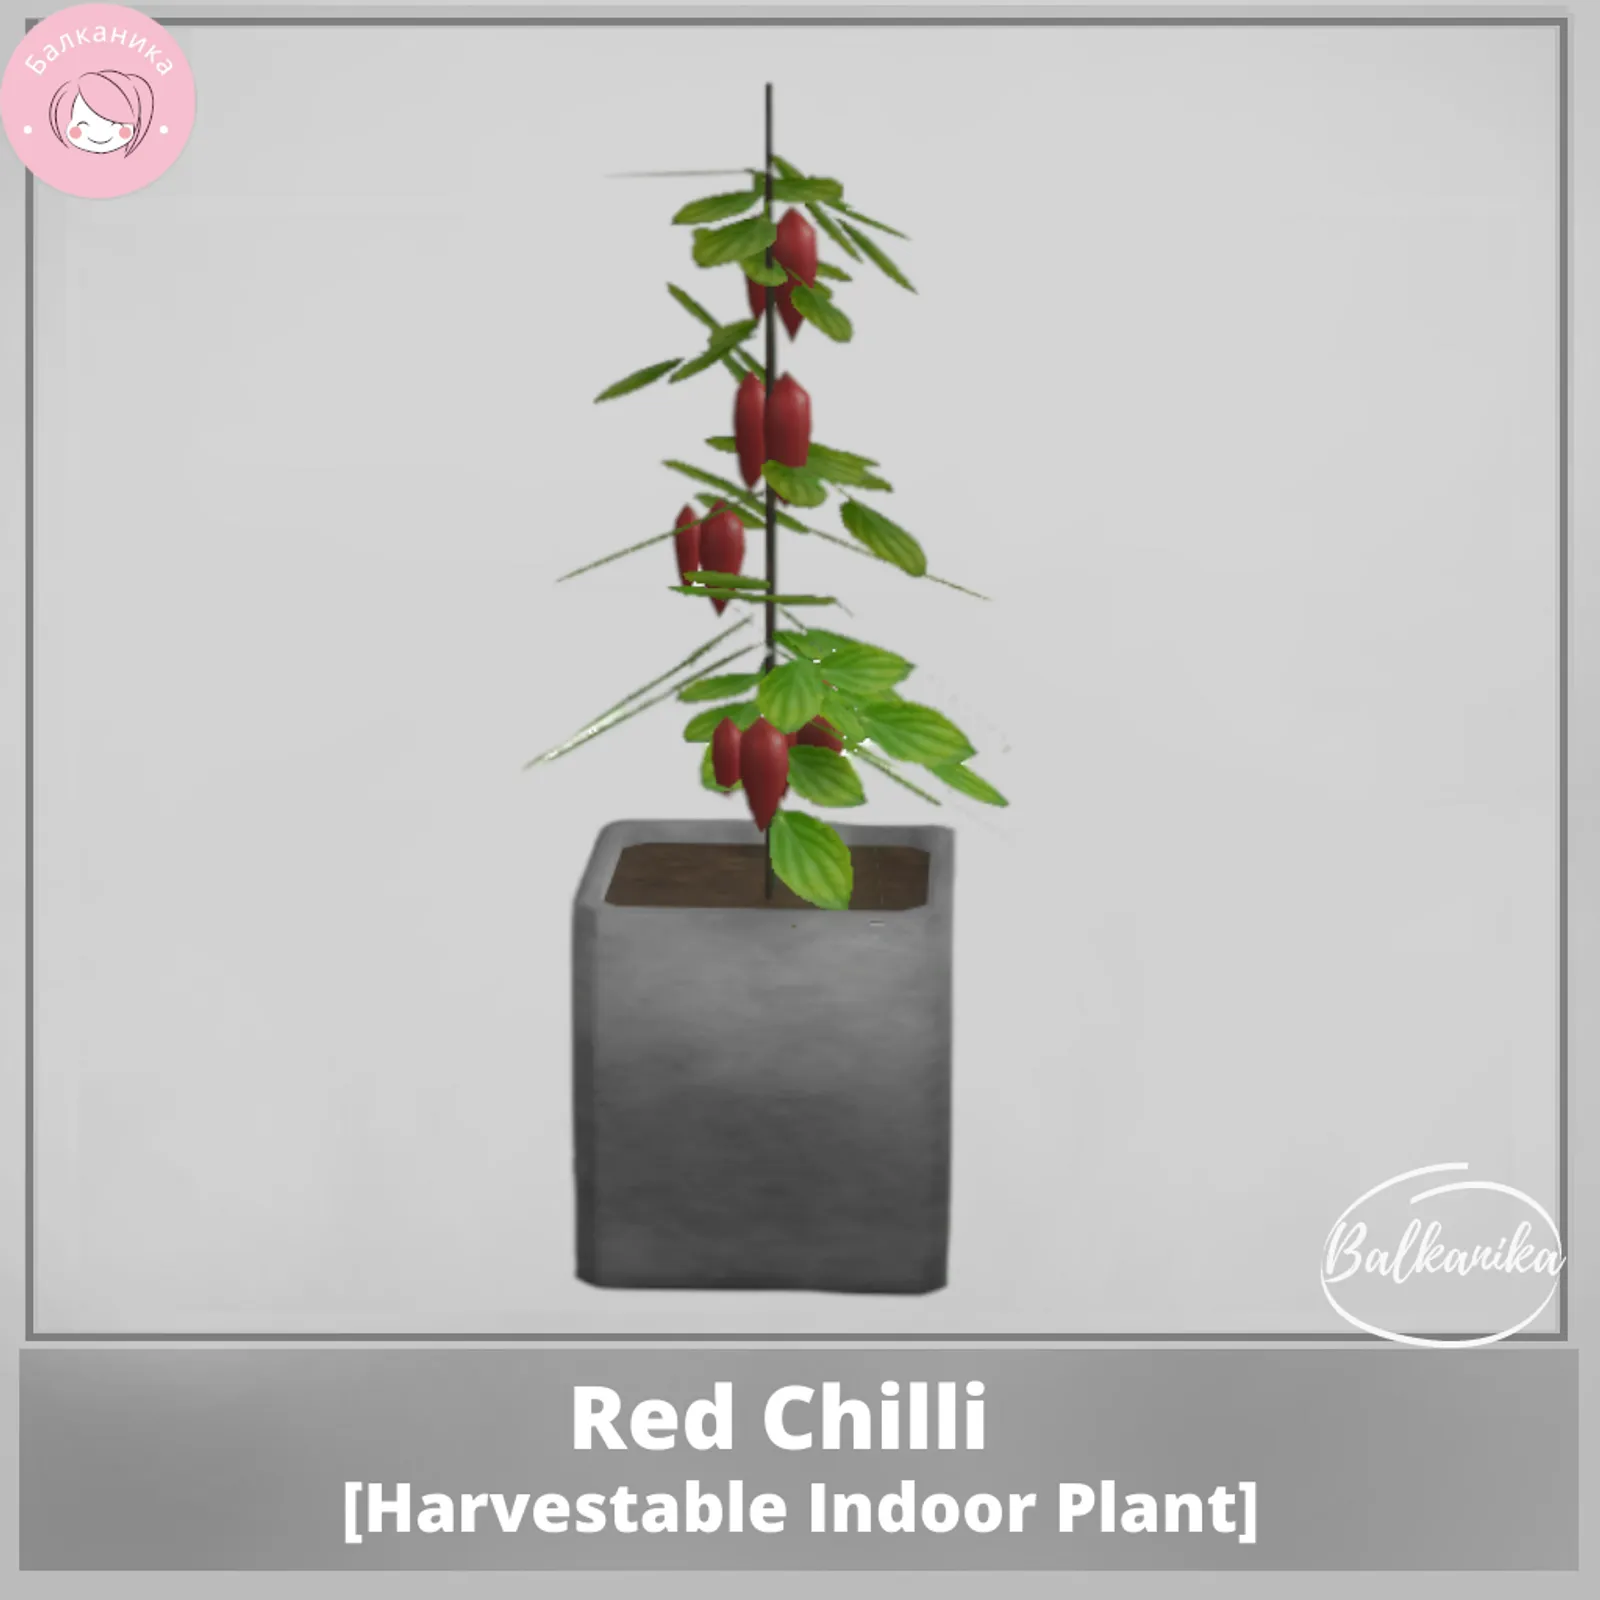 Red Chili [Harvestable Indoor Plant]